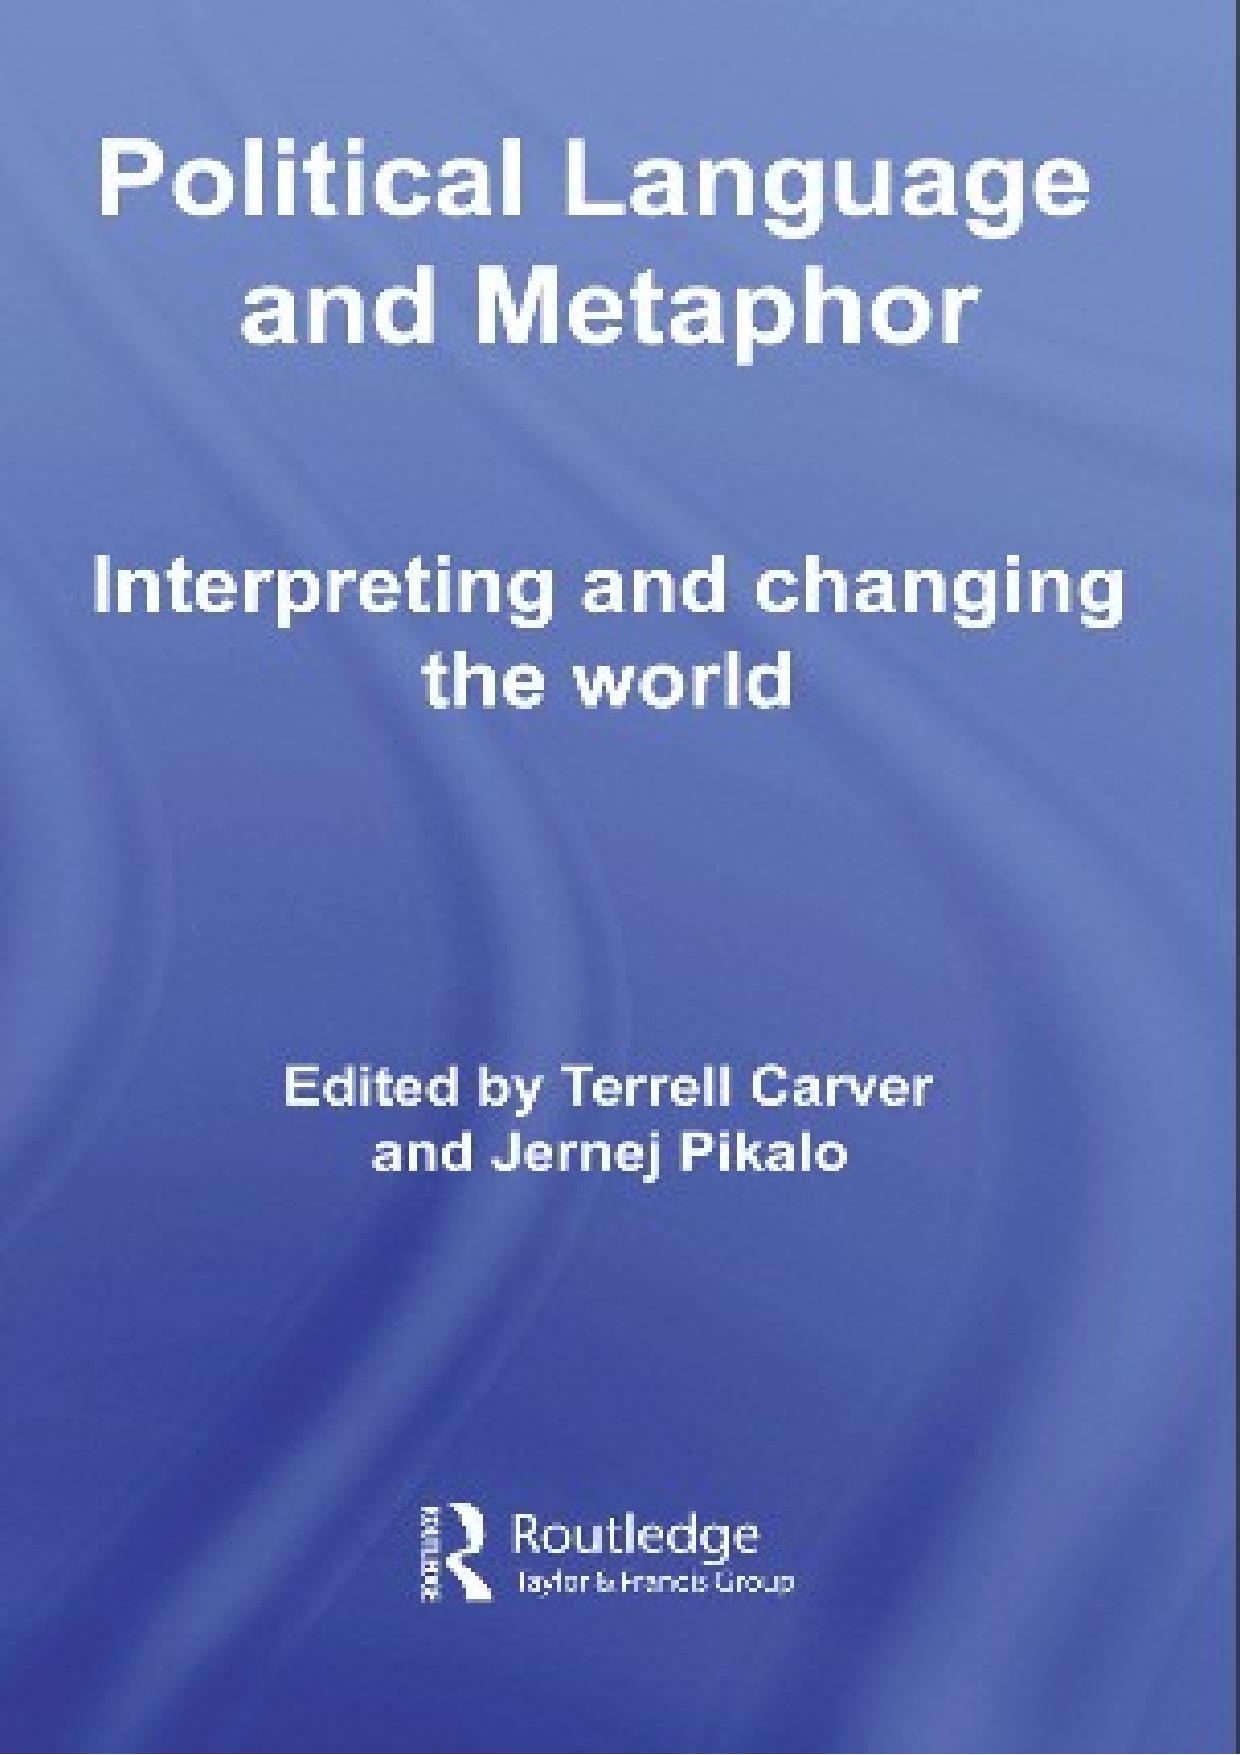 Political Language and Metaphor: Interpreting and Changing the World